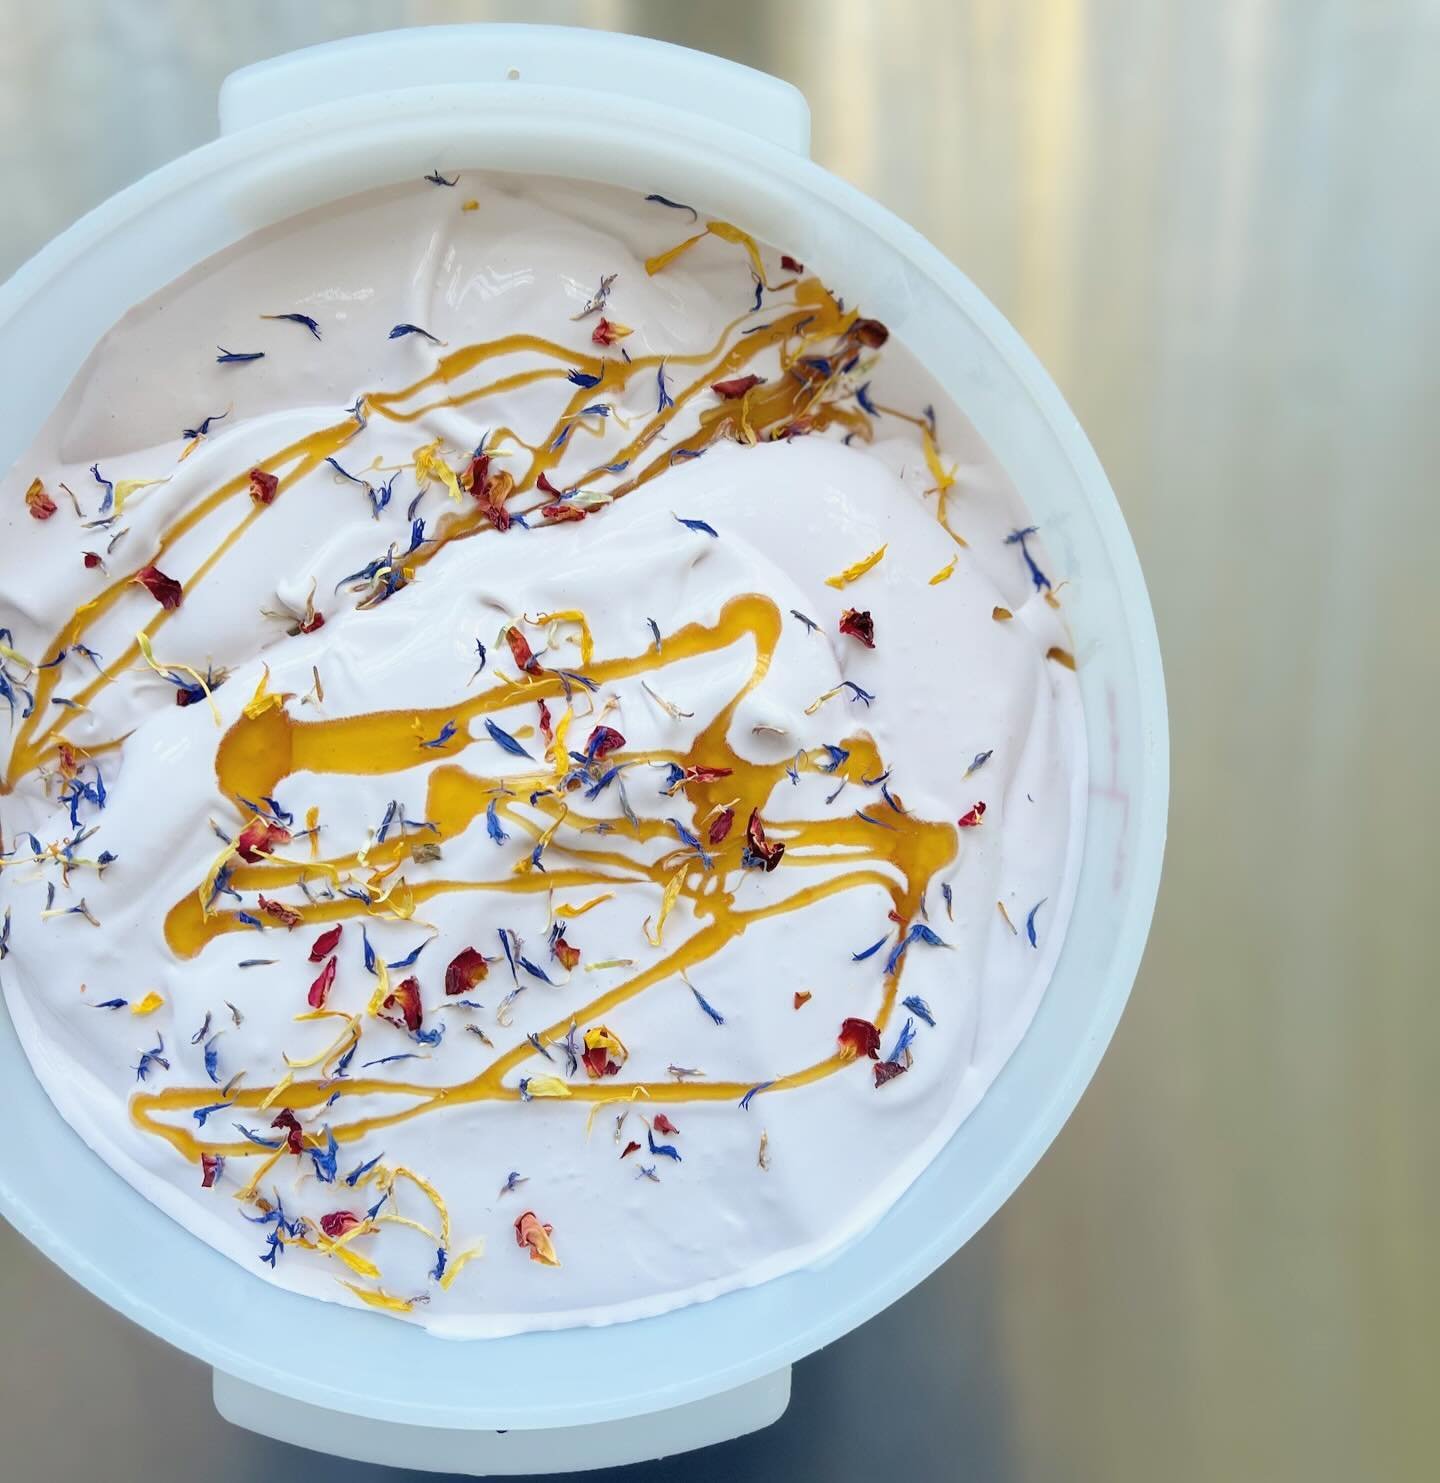 ❗️FRIDAY 5/3❗️is First Friday in Chester and we made a special lil flavor to celebrate what all those April showers brought us&hellip;

🪻MAY FLOWERS💐 - Lavender ice cream with a honey drizzle and dried flower petals✨

We&rsquo;ll be scooping this a